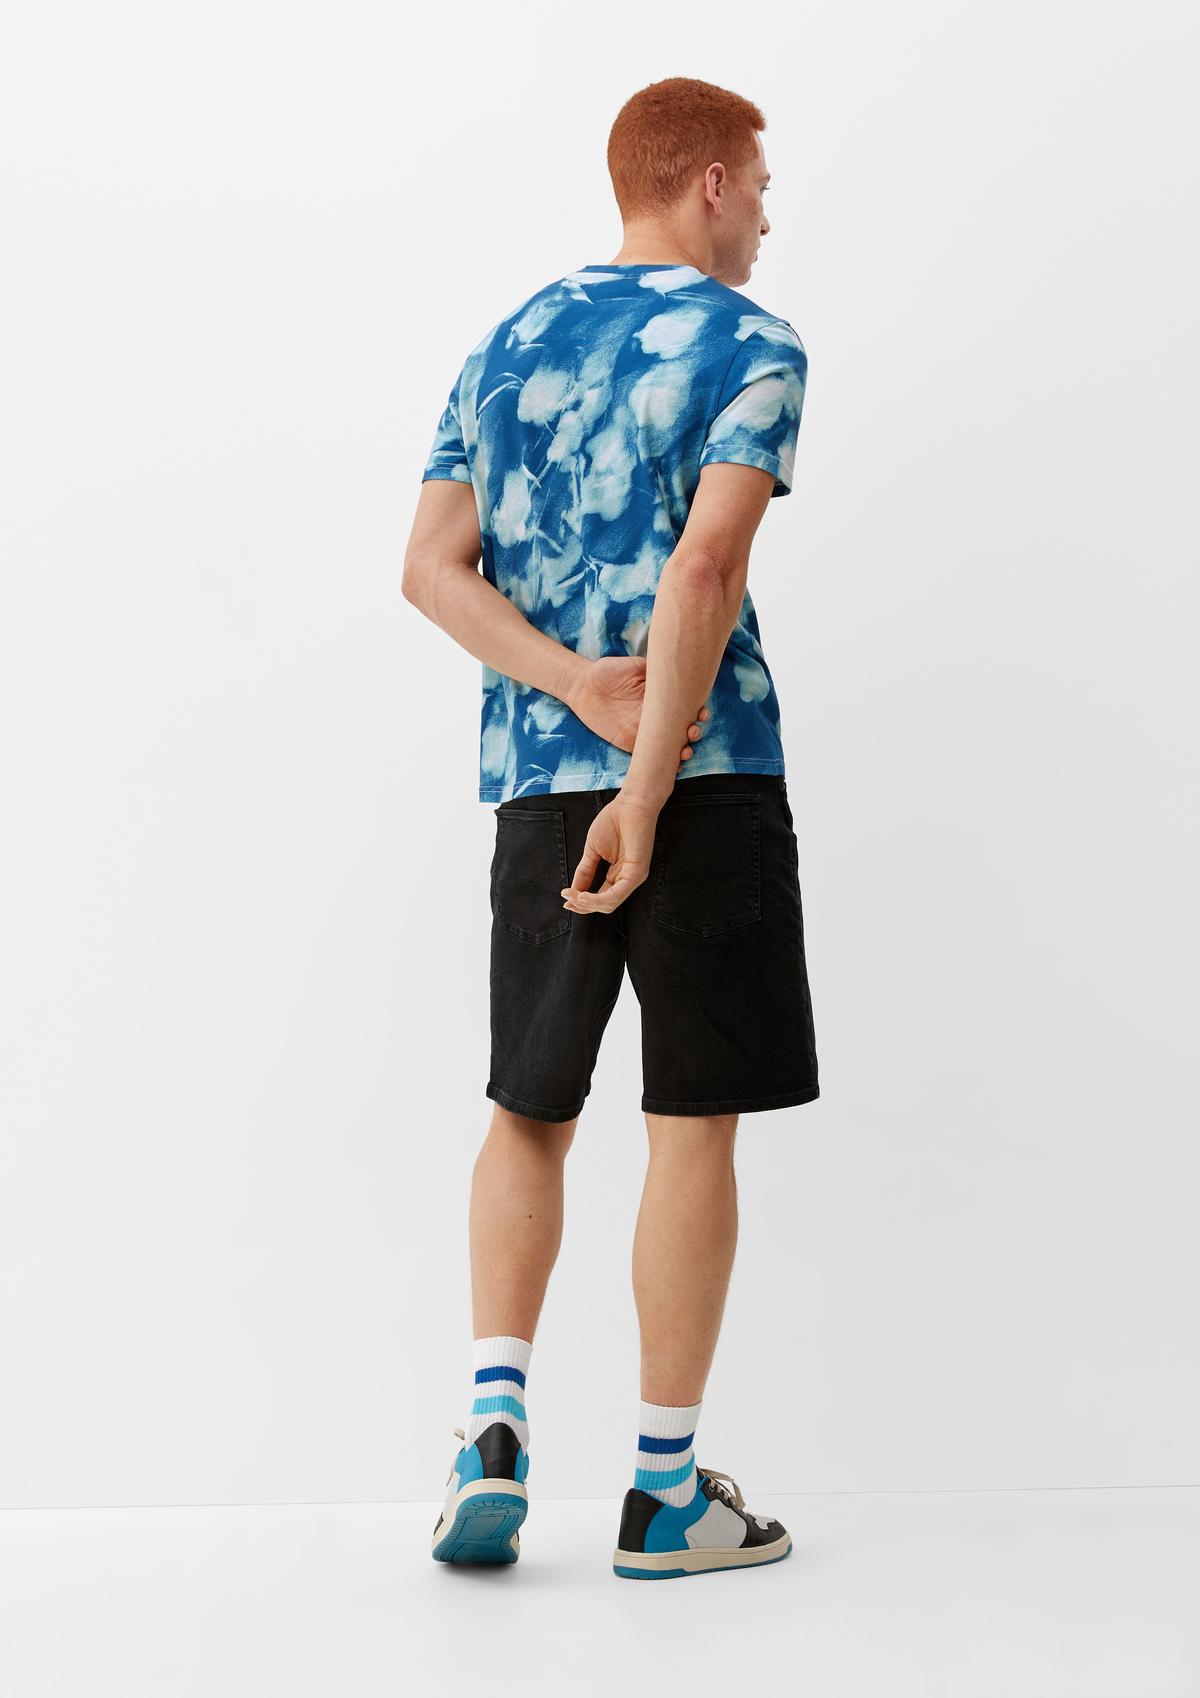 with dark - T-shirt an blue all-over print